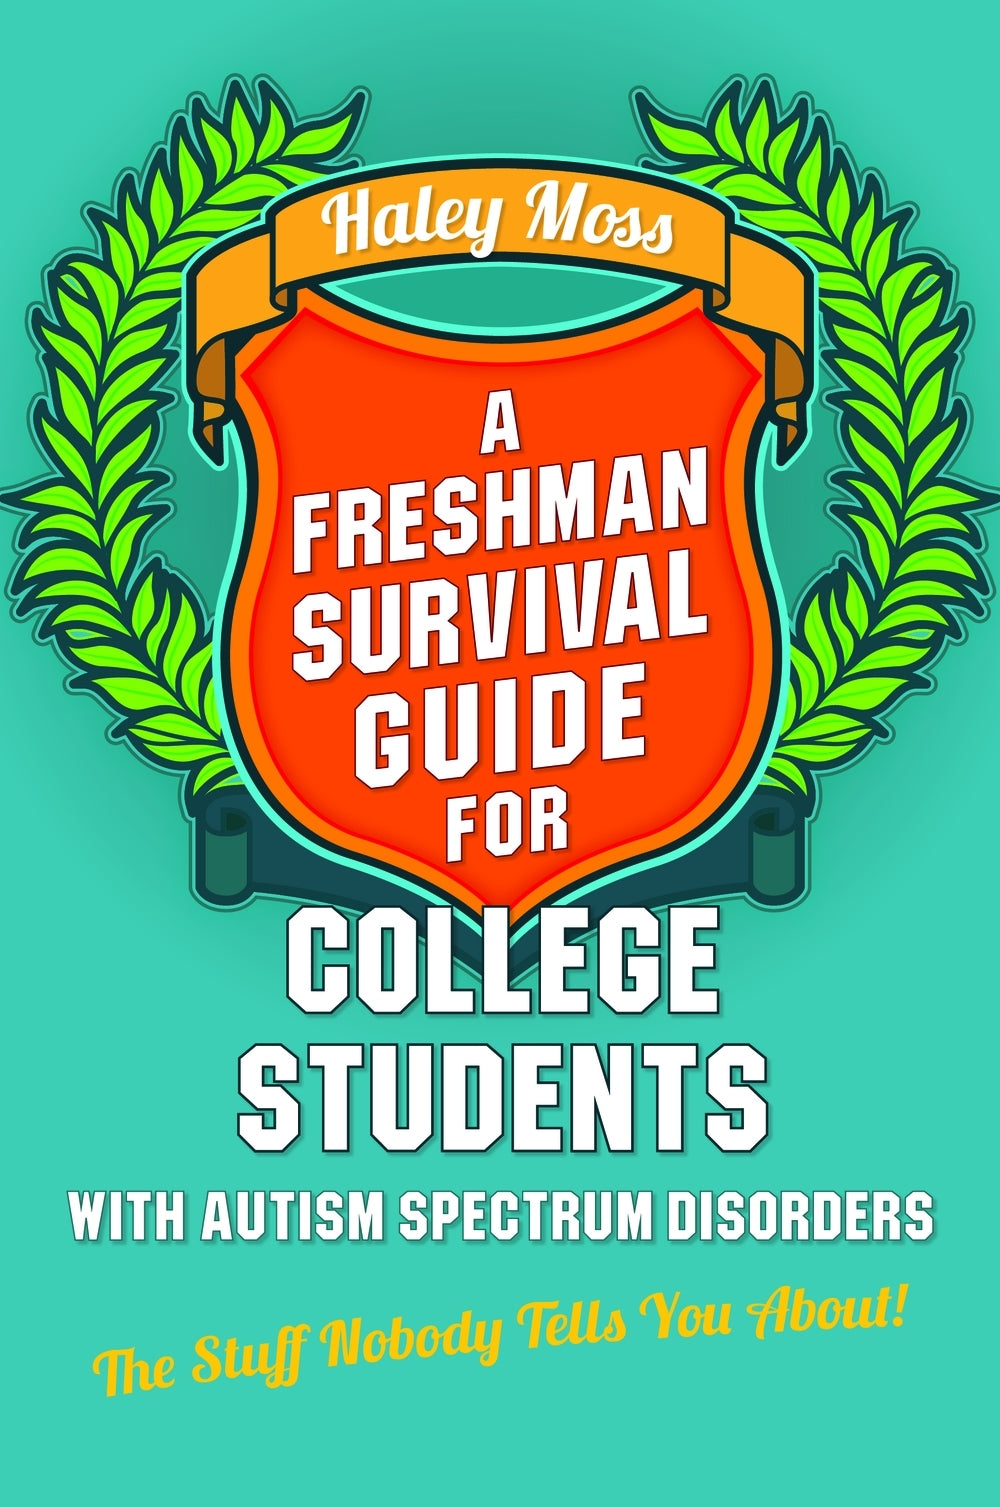 A Freshman Survival Guide for College Students with Autism Spectrum Disorders by Haley Moss, Susan J. Moreno